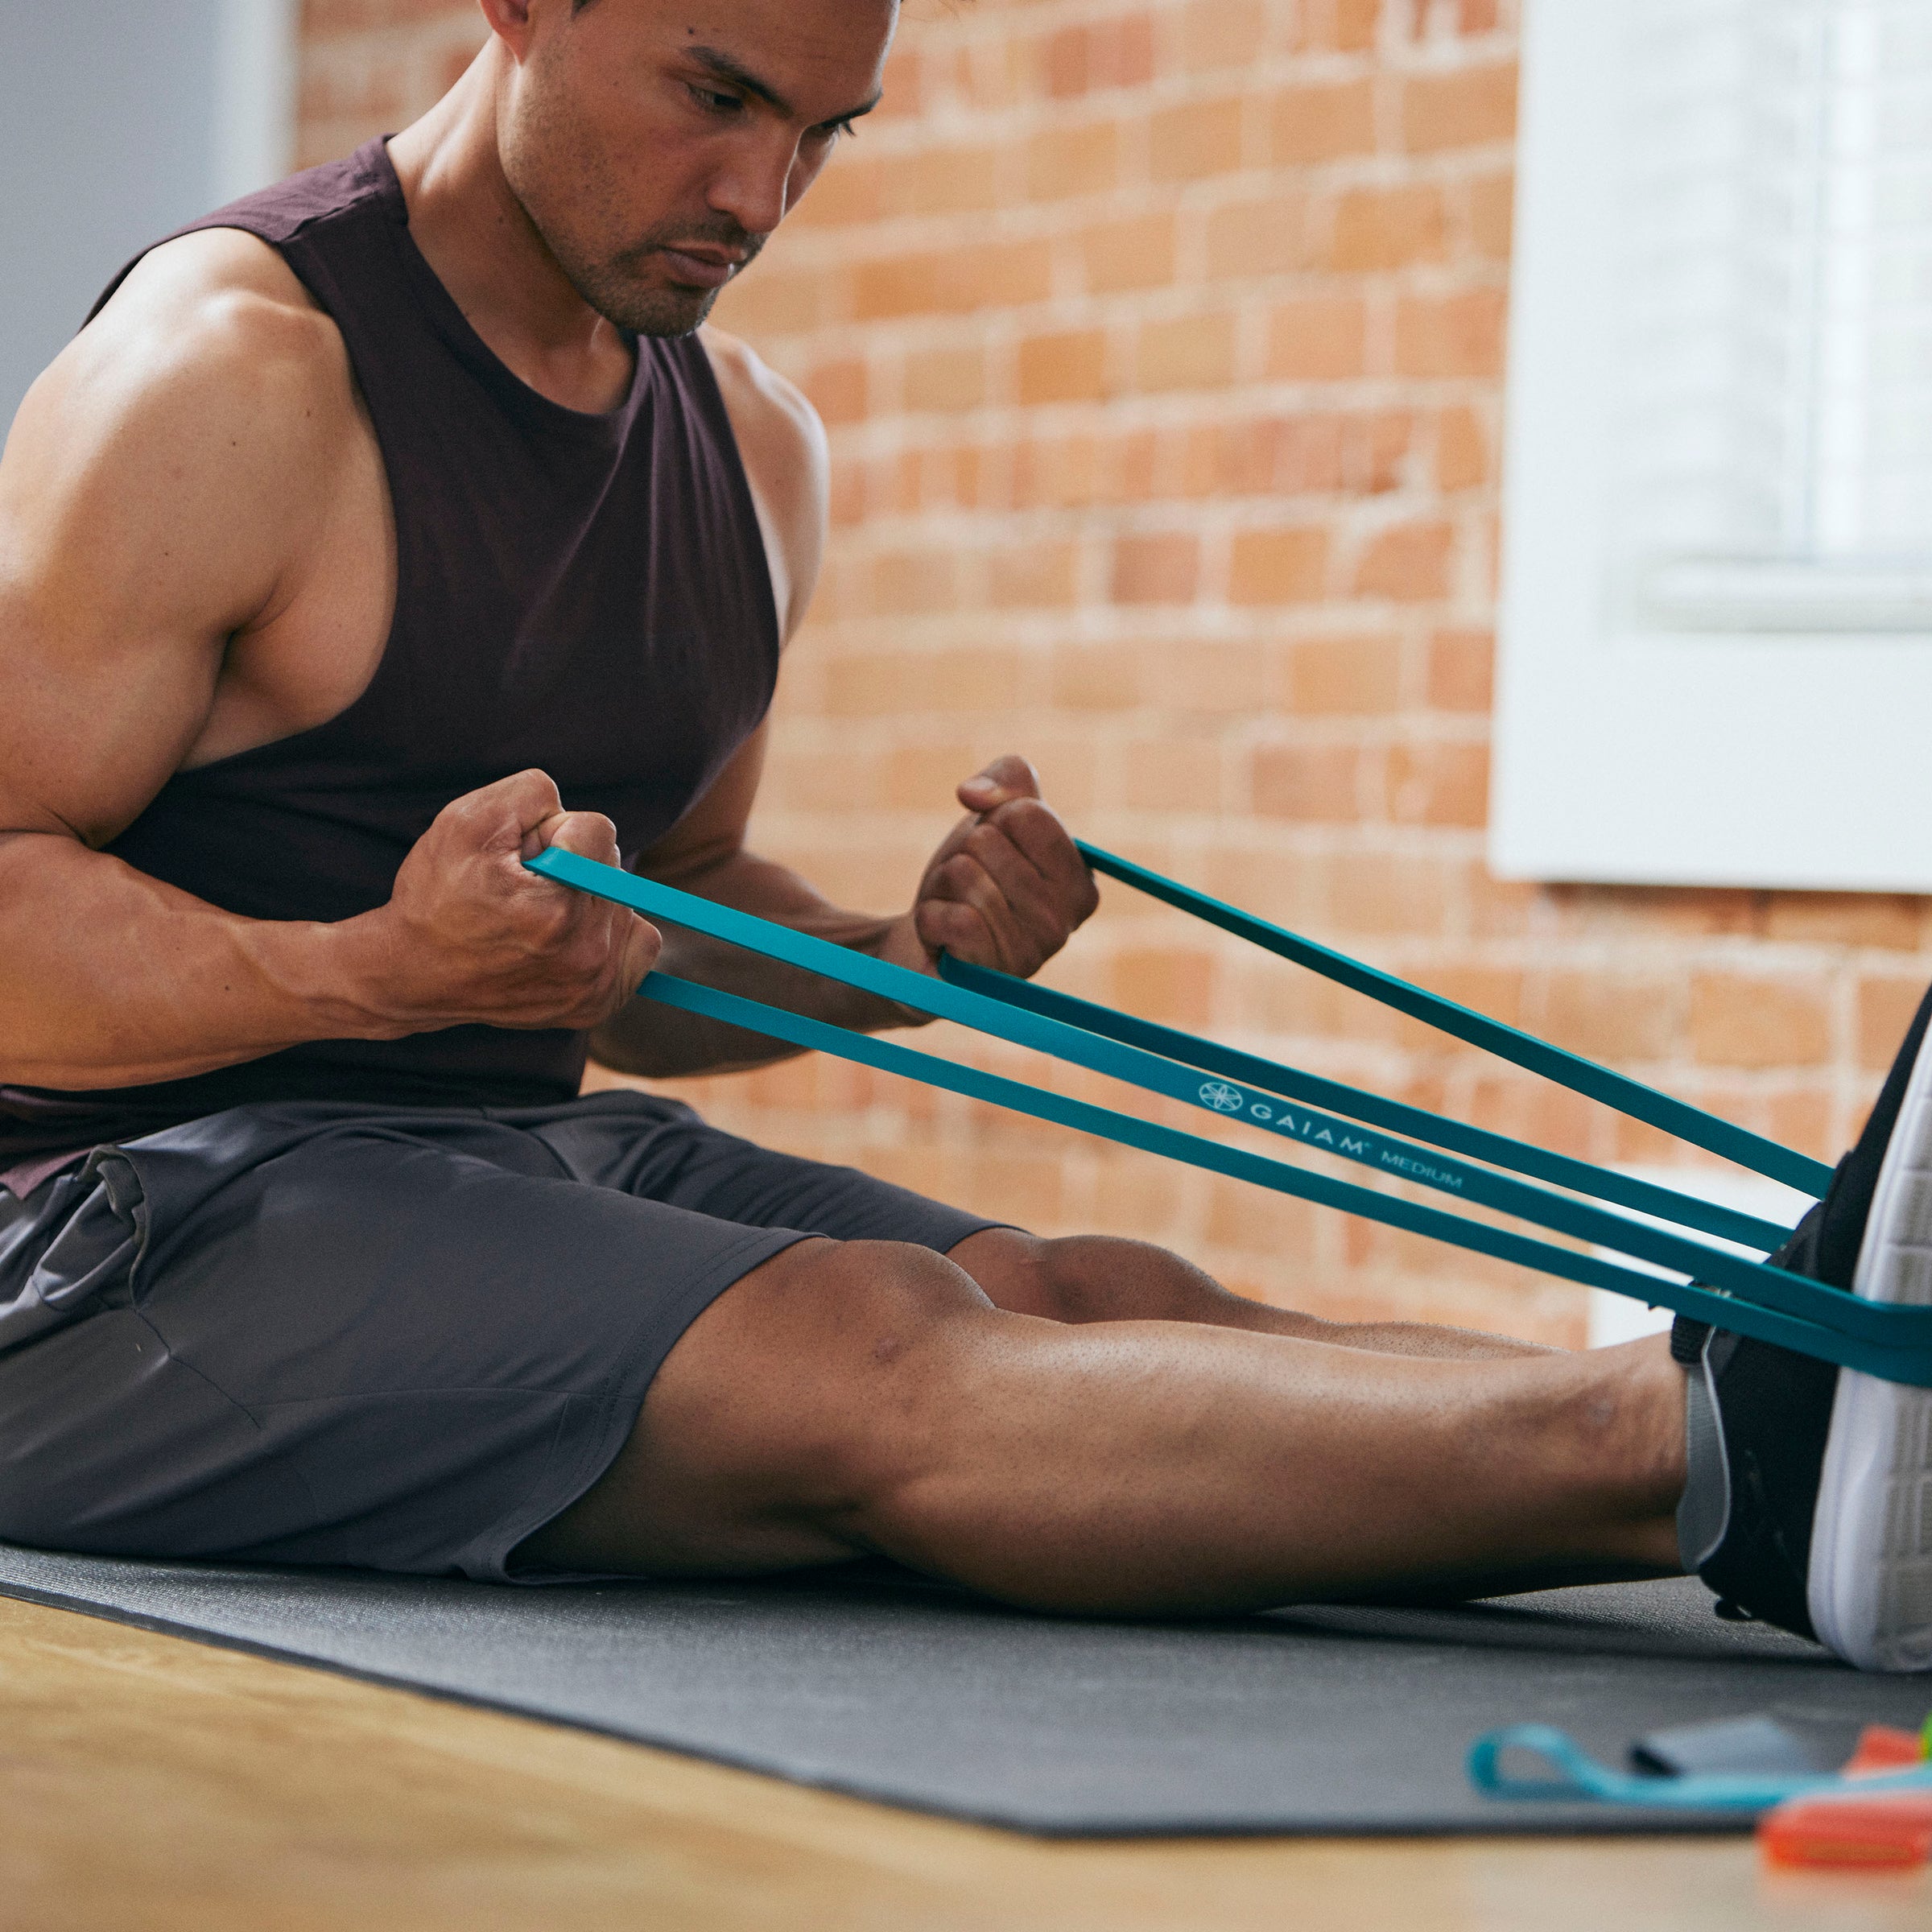 NEW Gaiam Resistance Bands 3 Resistant Levels Built Body Strength